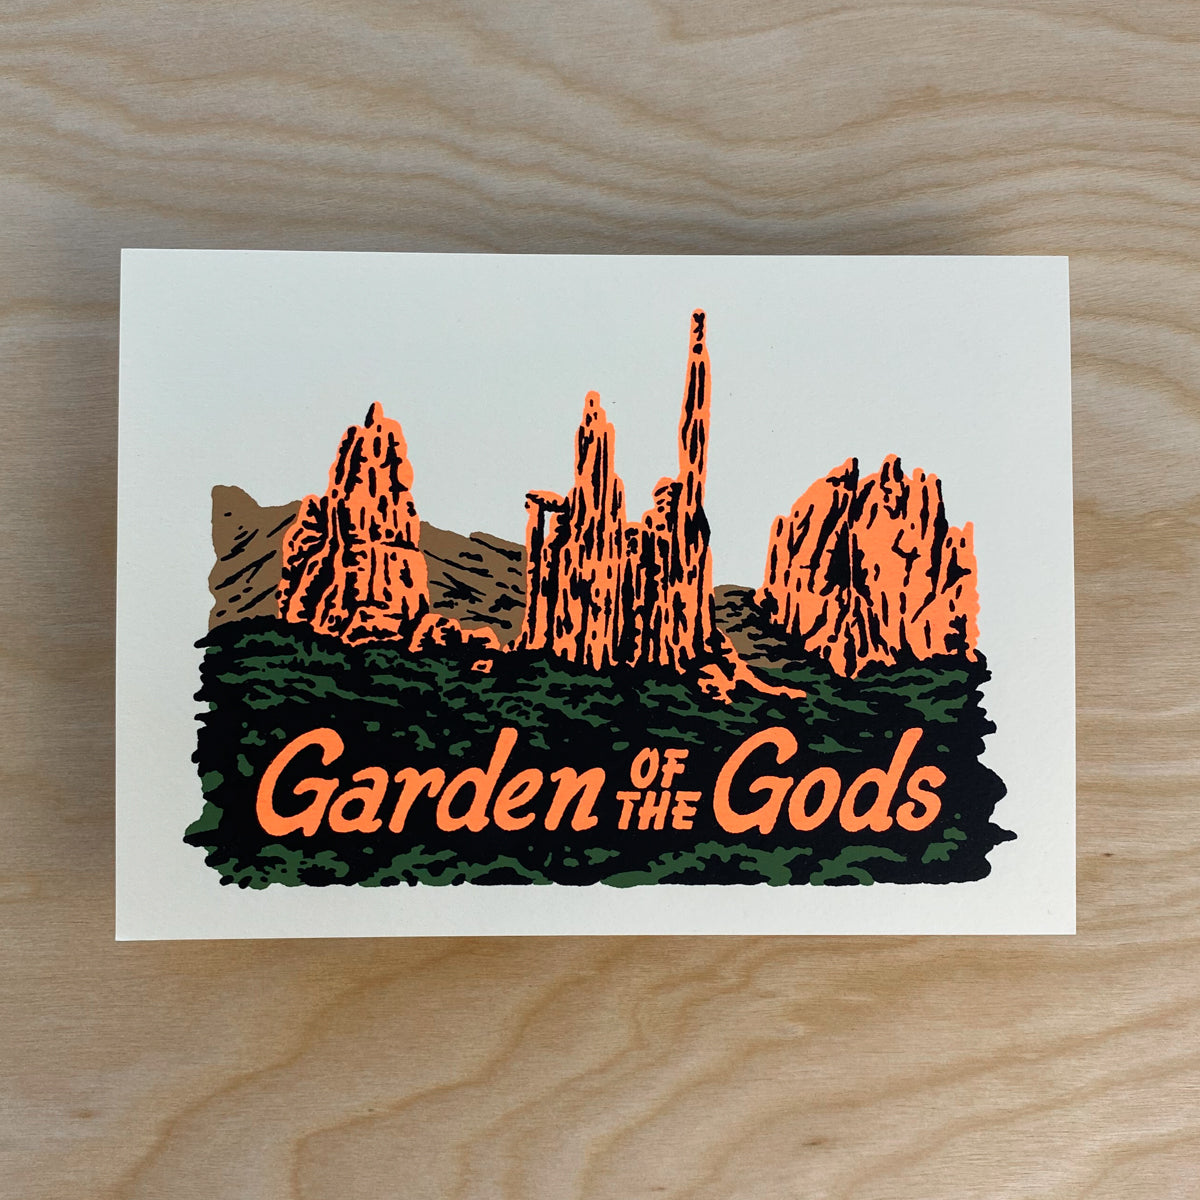 SOLD OUT. Garden of the Gods  - Signed 7x5in Print #217